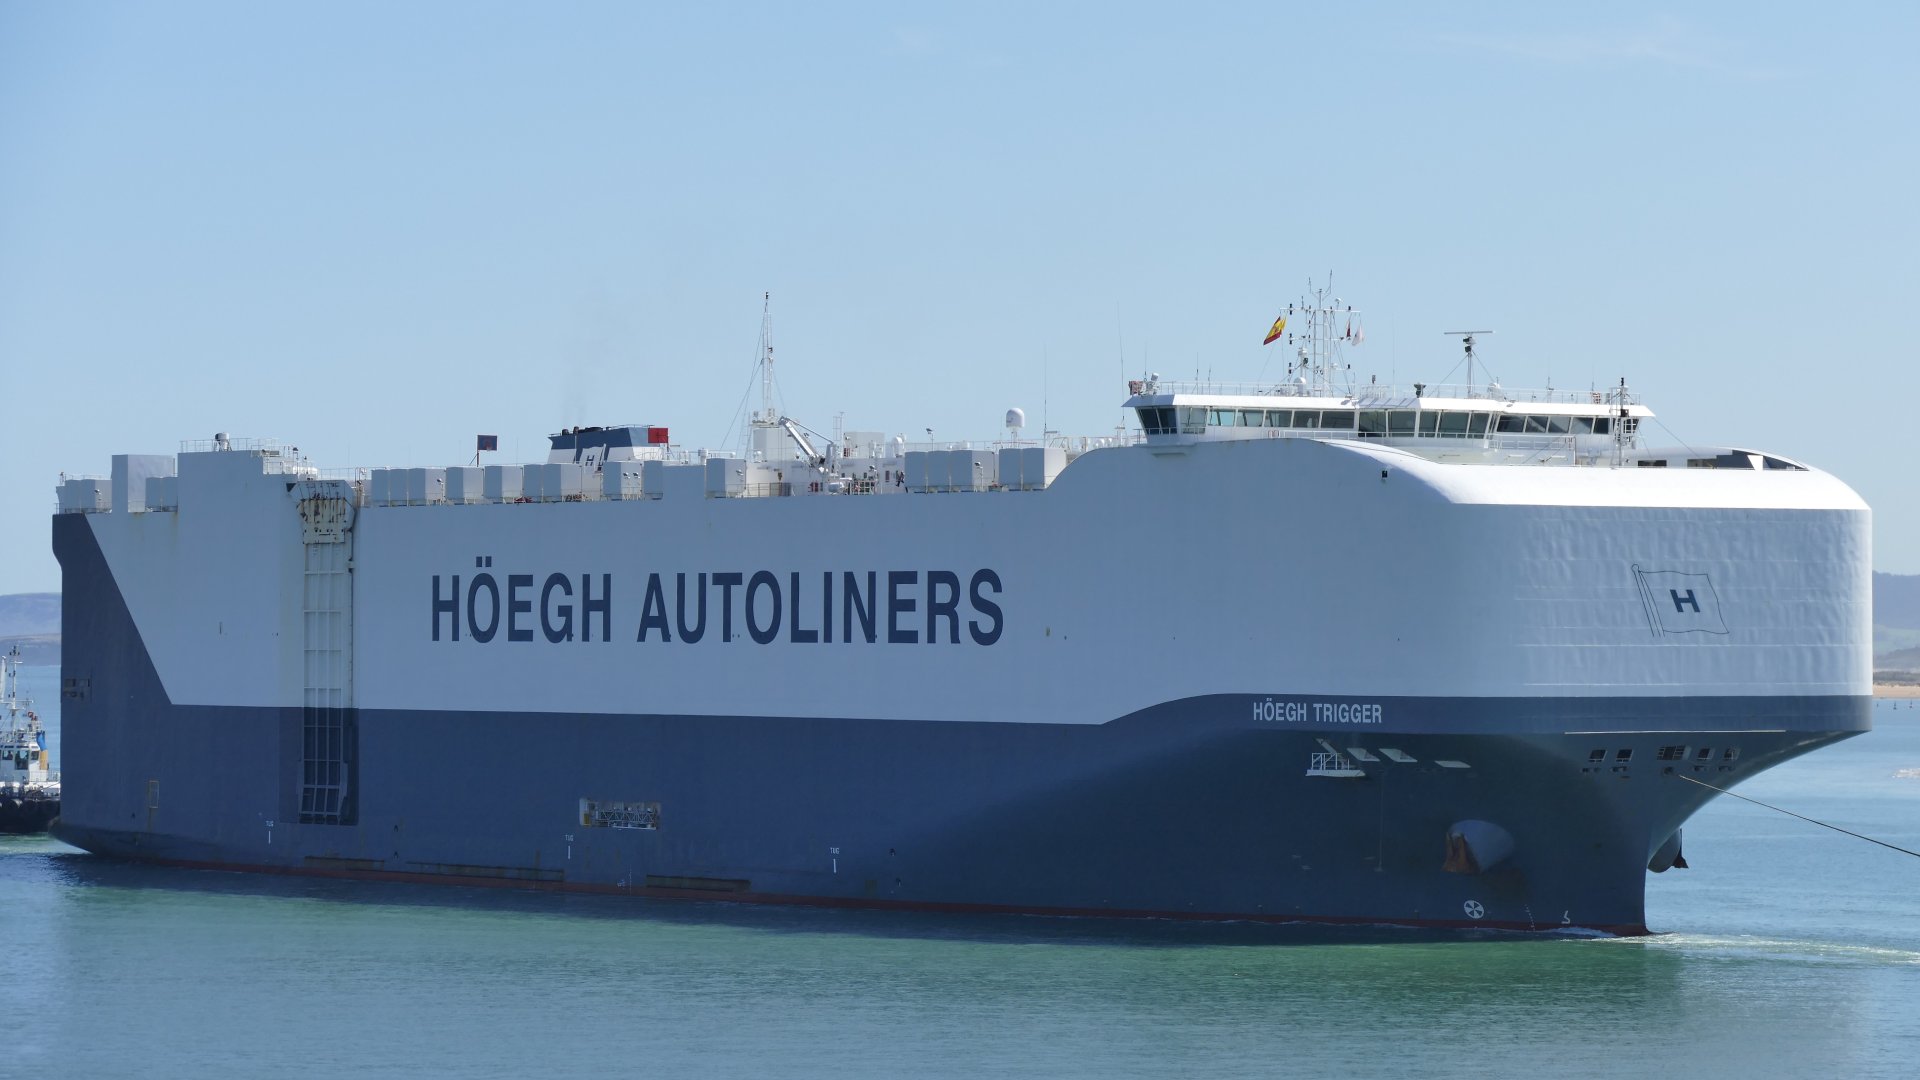 Höegh Autoliners concludes its first carbon-neutral journey